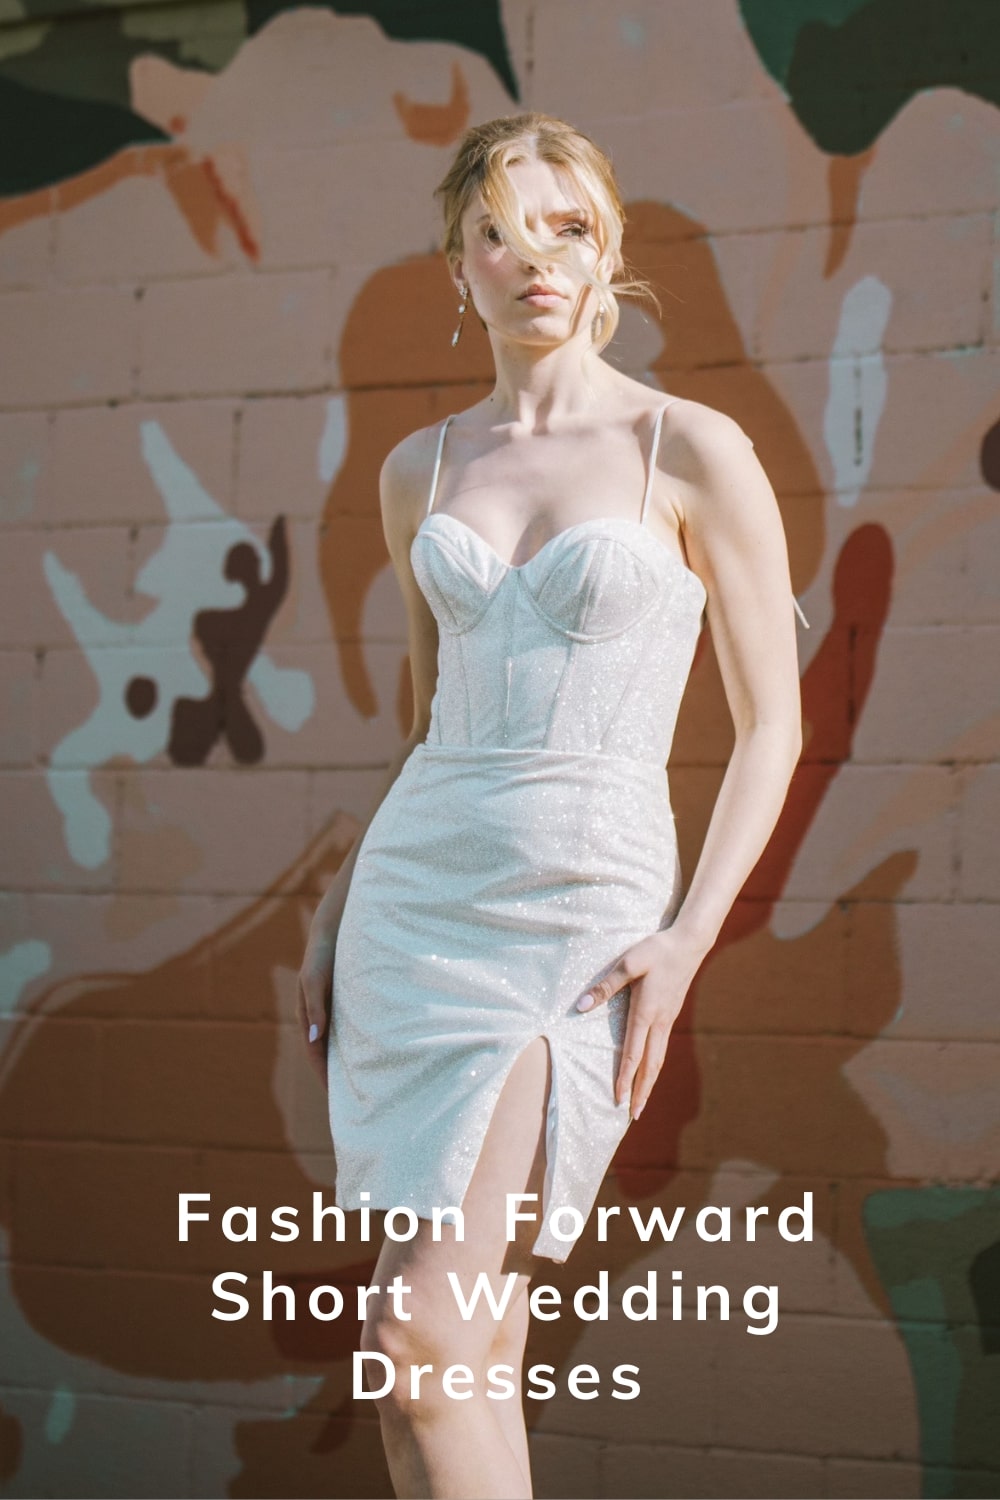 pinnable graphic for "Fashion Forward Short Wedding Dresses" from The Wedding Shoppe